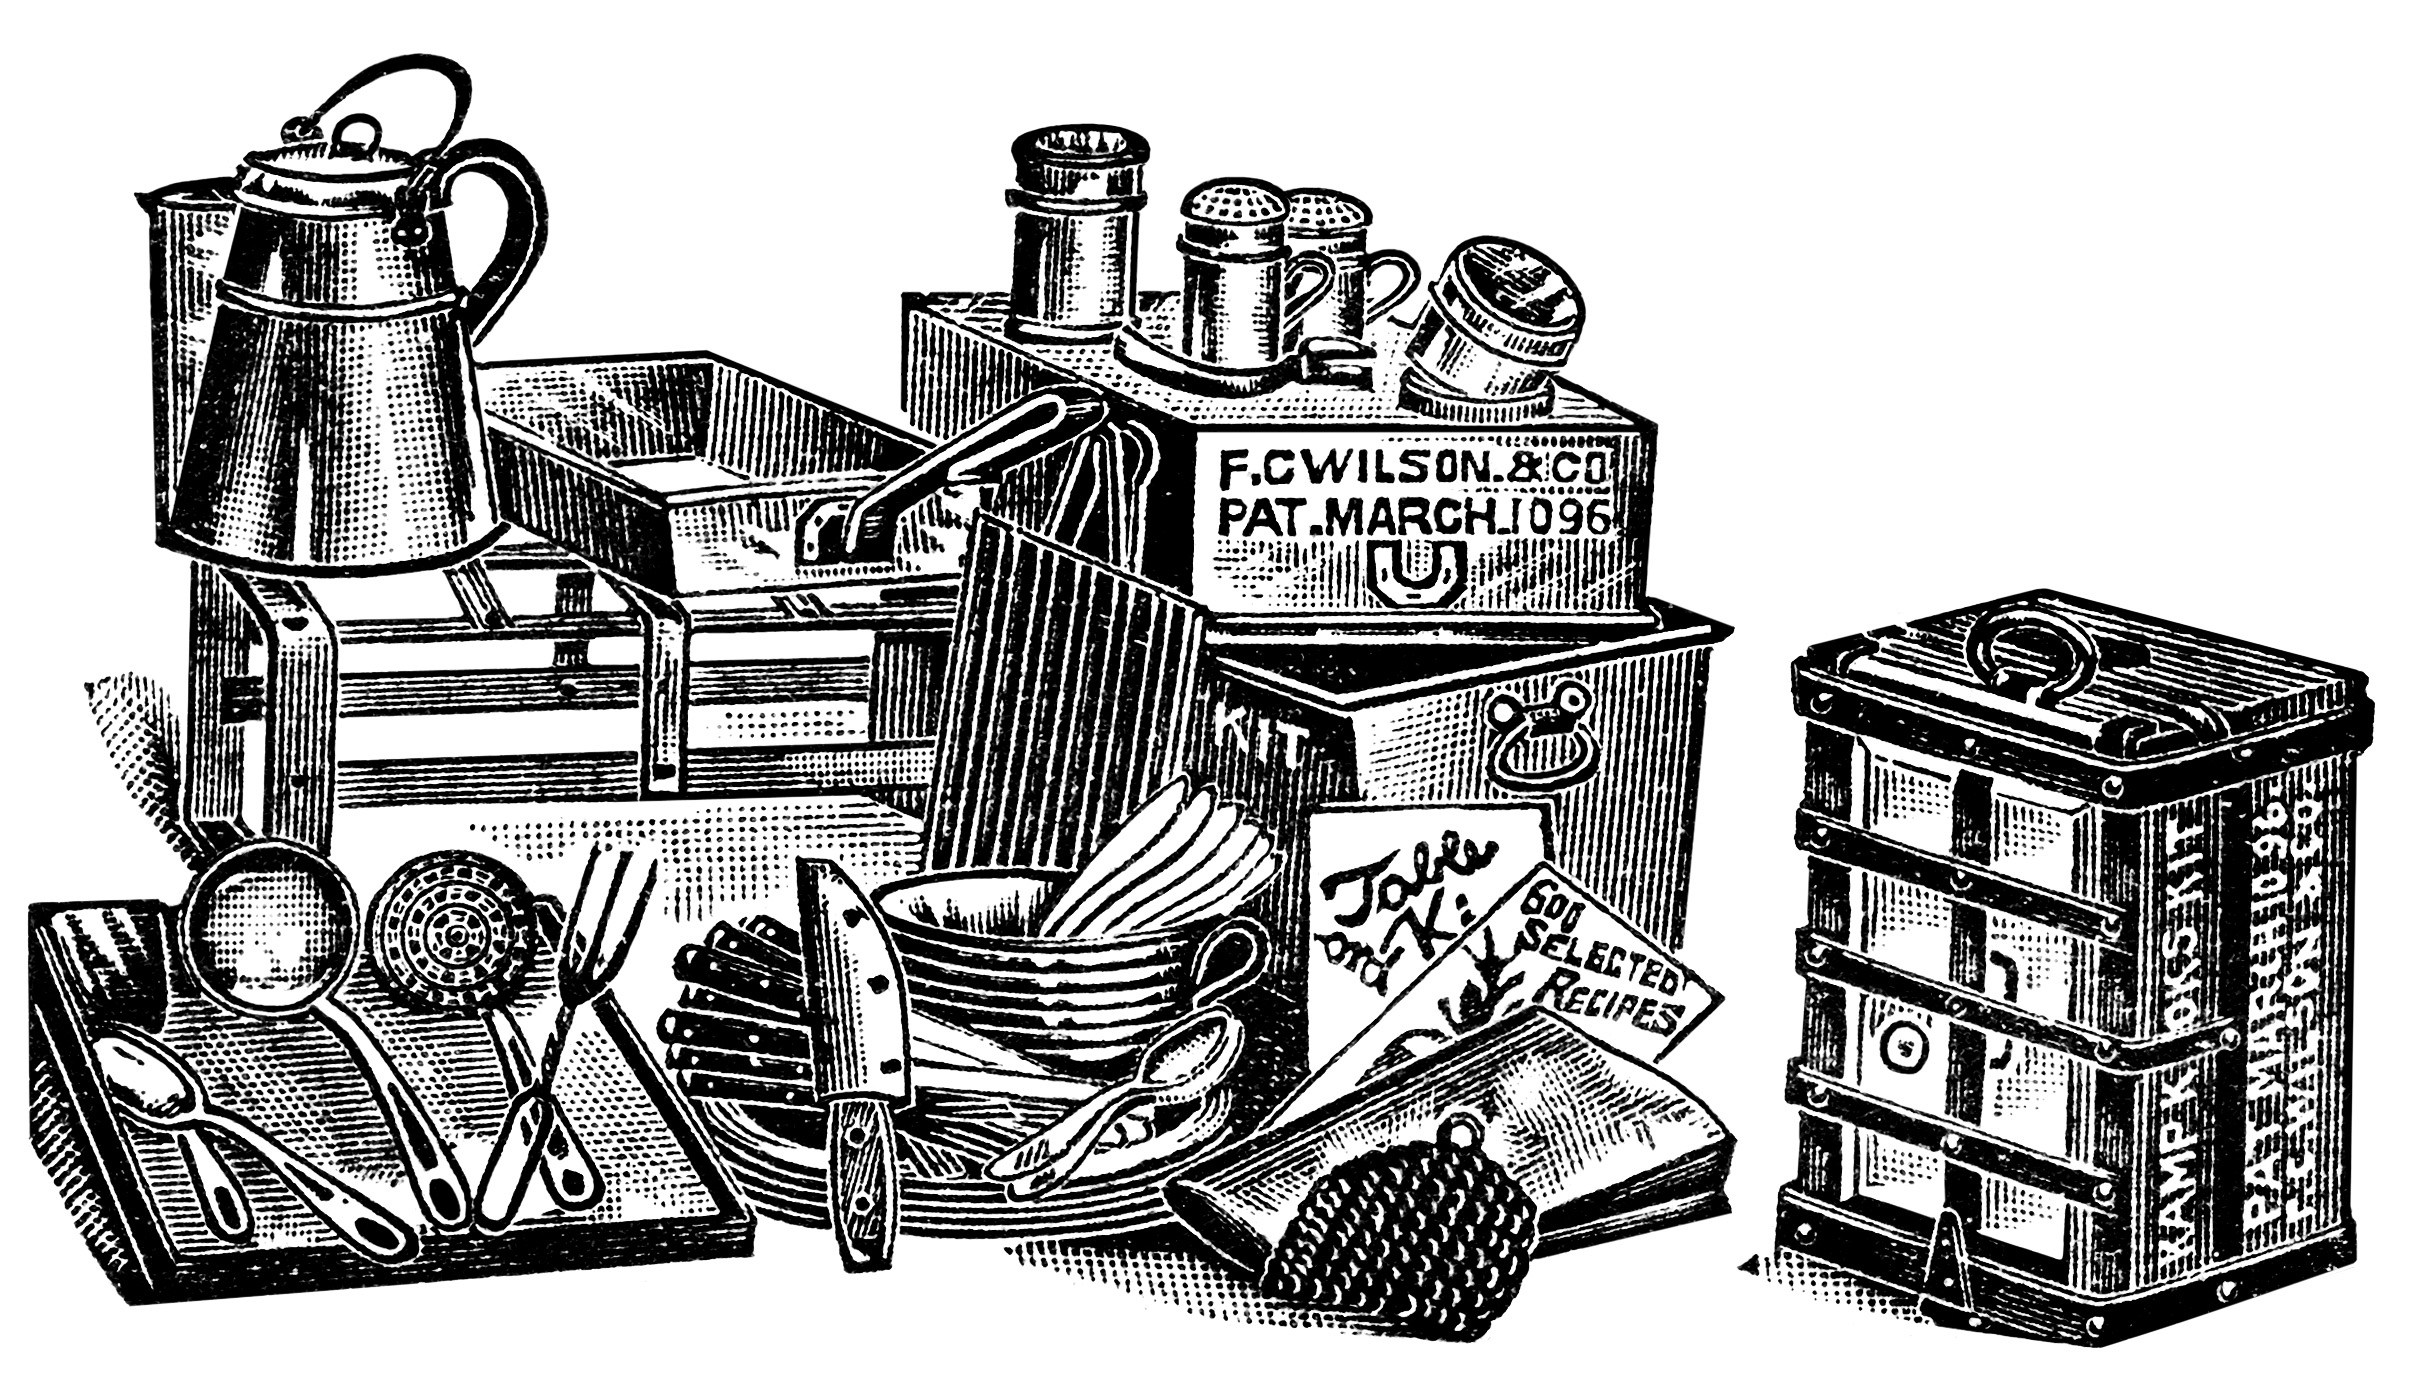 Black And White Clip Art Version Of The Camp Cooking Supplies From